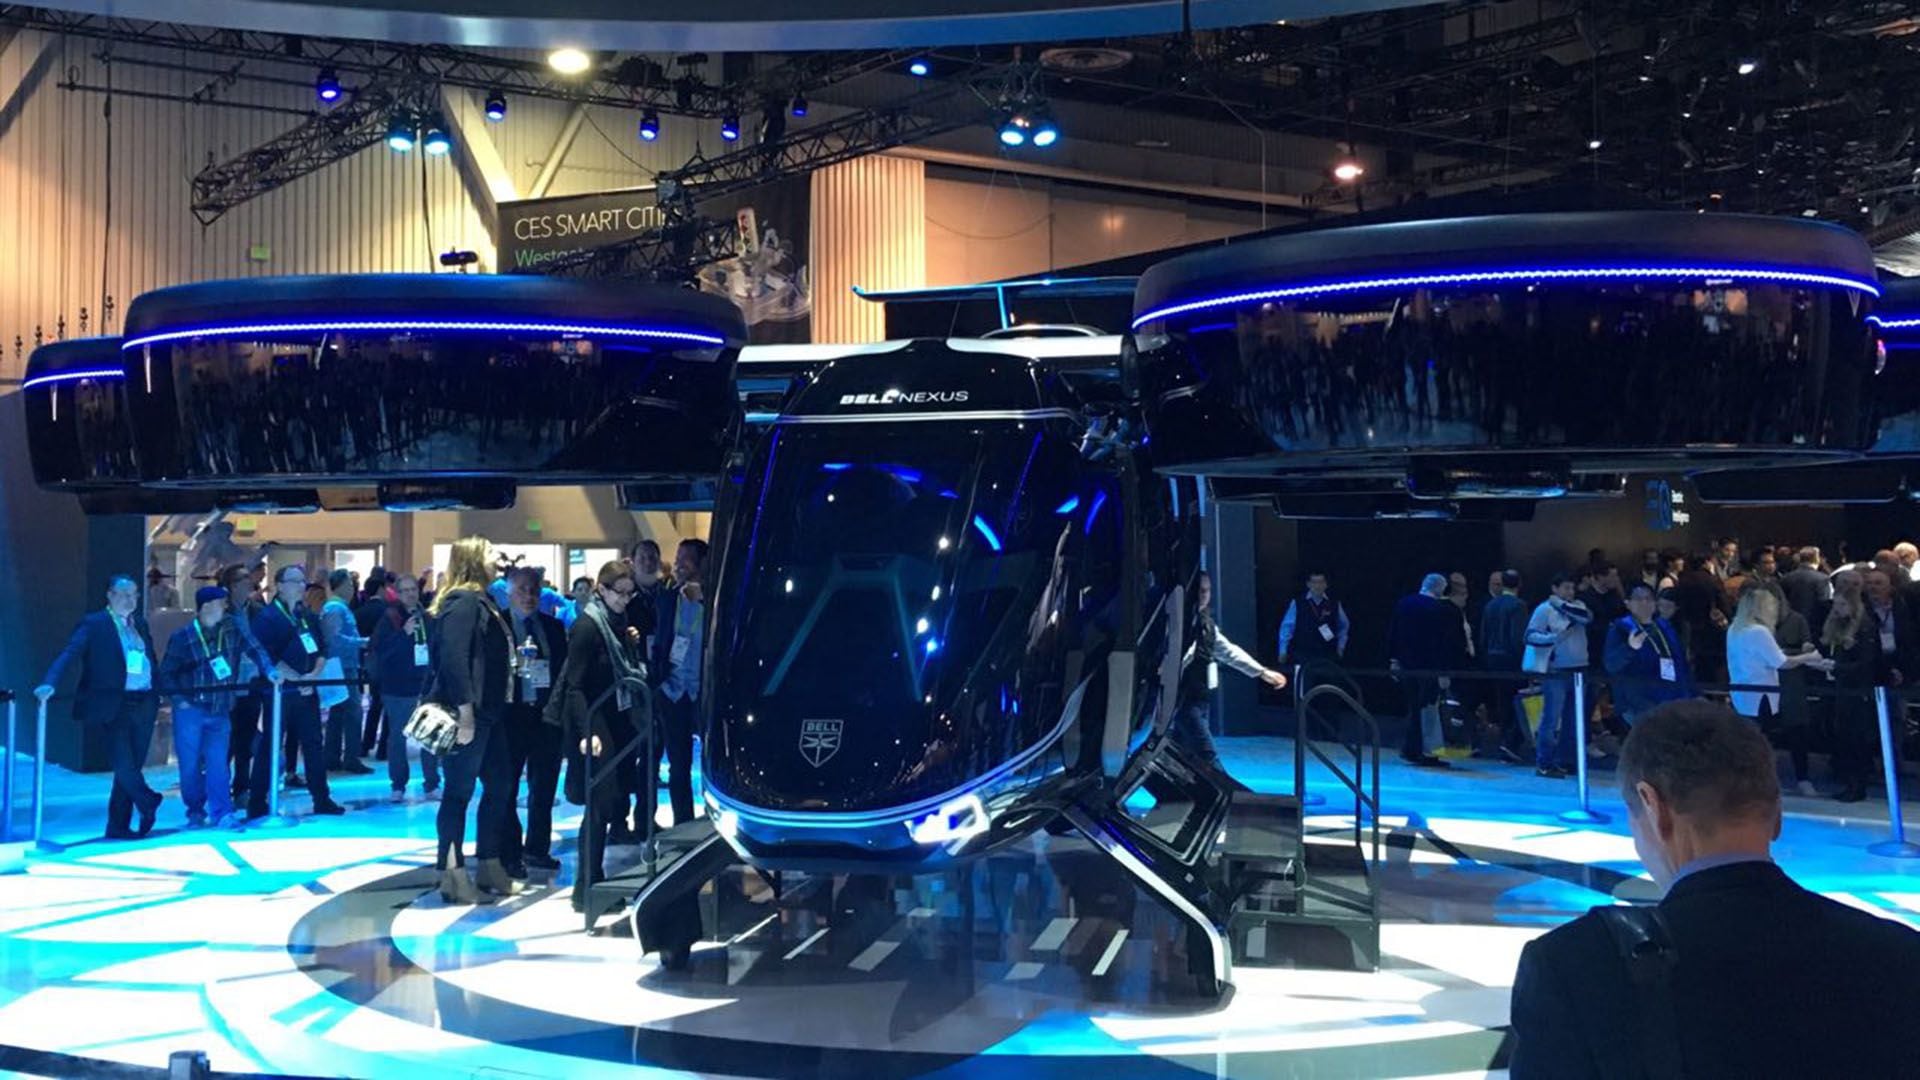 Bell Nexus is the air taxi concept that Uber would use to transport passengers from 2023 (Photo: File / CES)